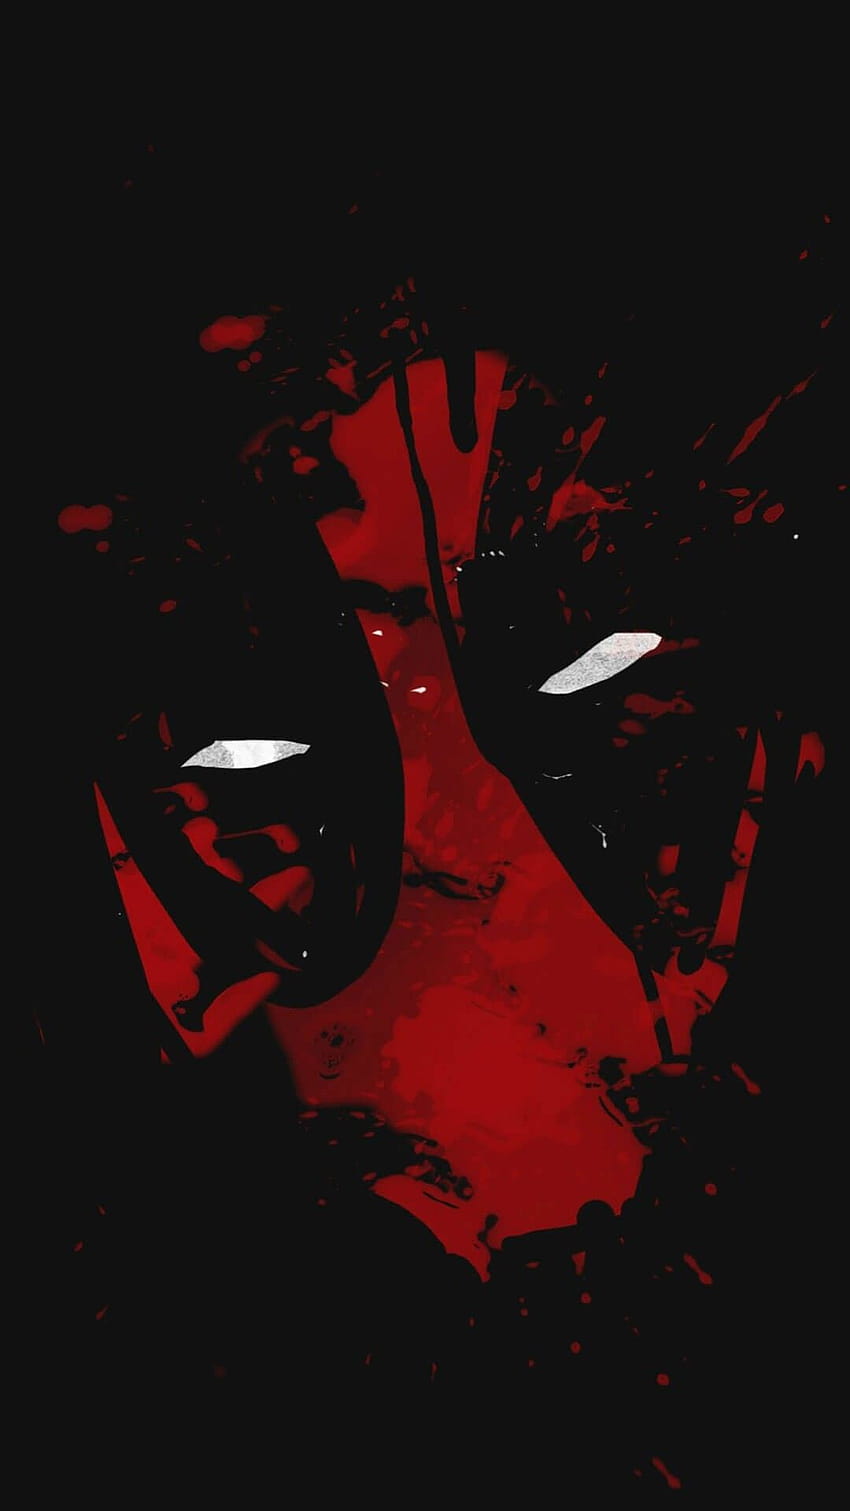 Deadpool Iphone 6 posted by Michelle Tremblay, deadpool amoled iphone HD phone wallpaper